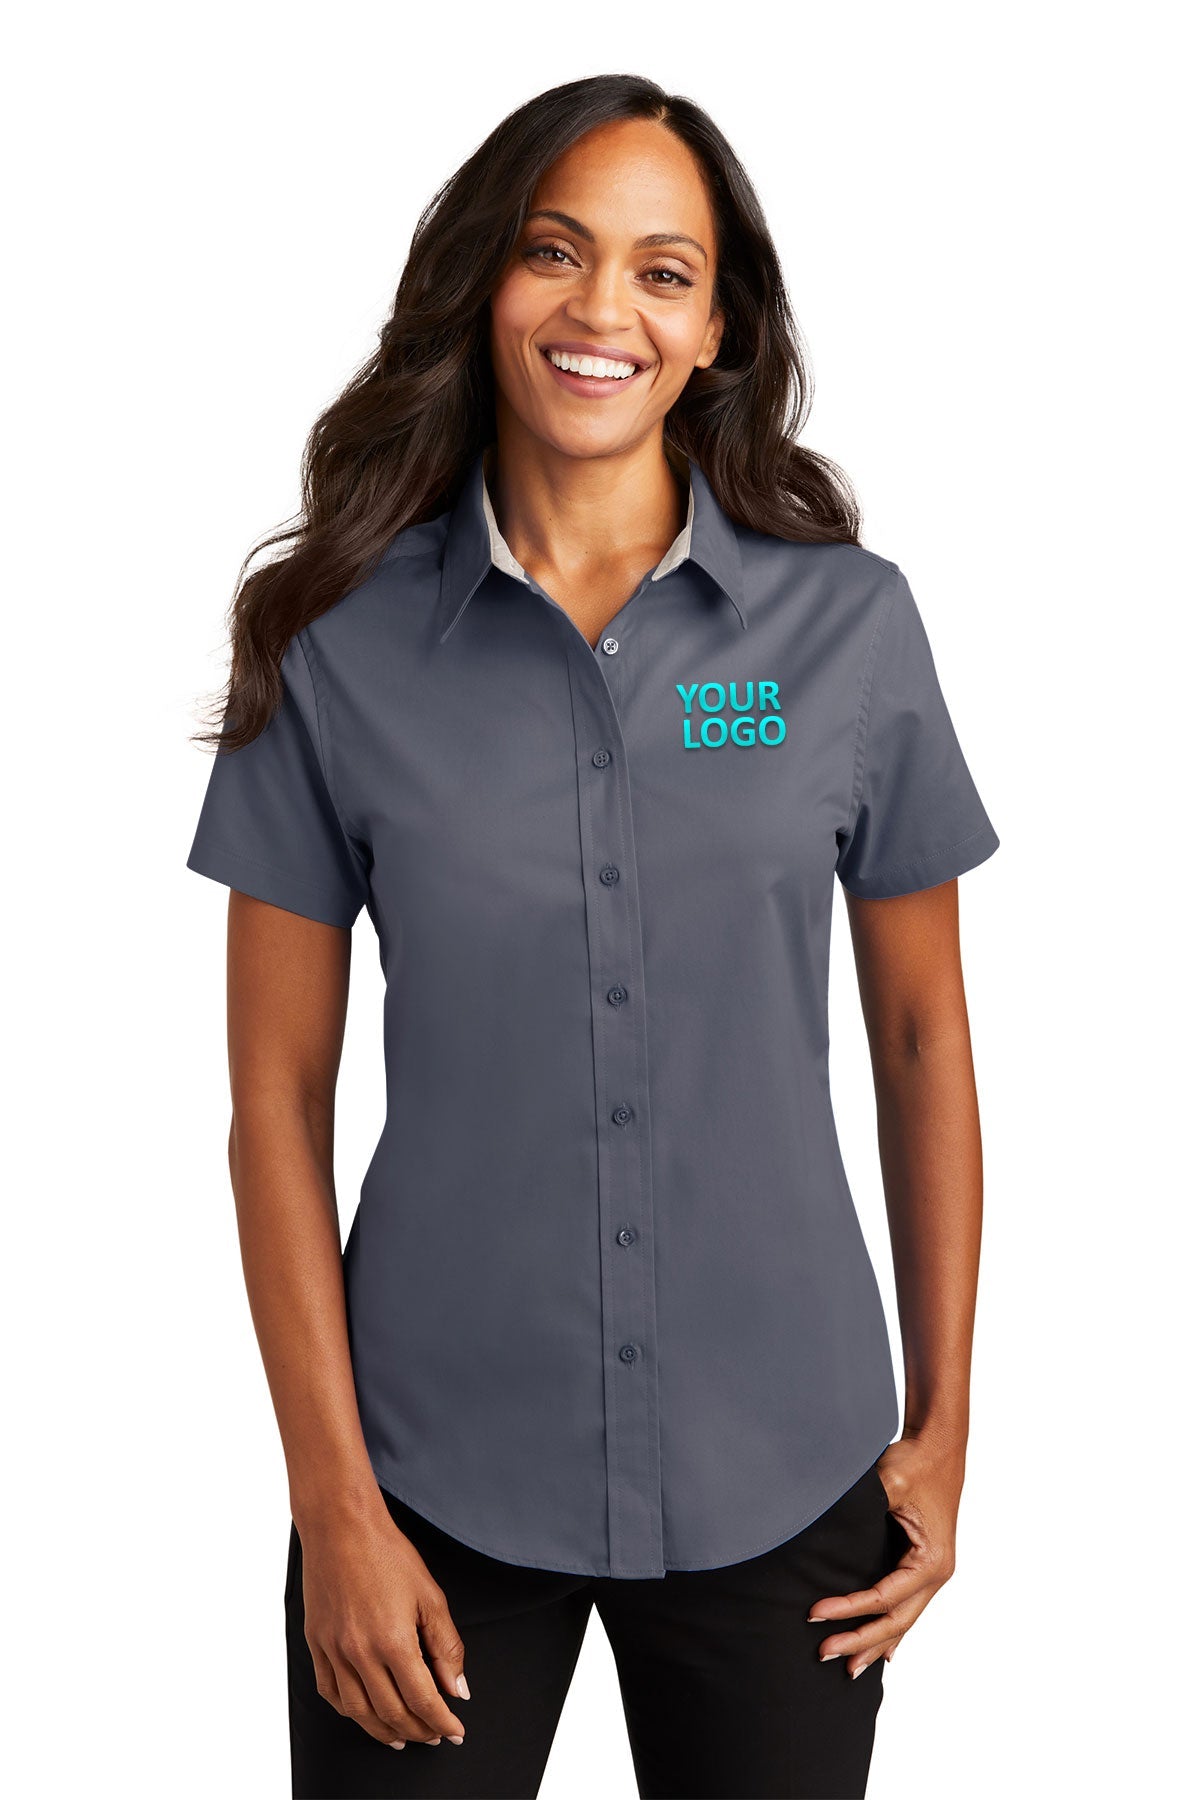 Port Authority Steel Grey/Light Stone L508 embroidered work shirts